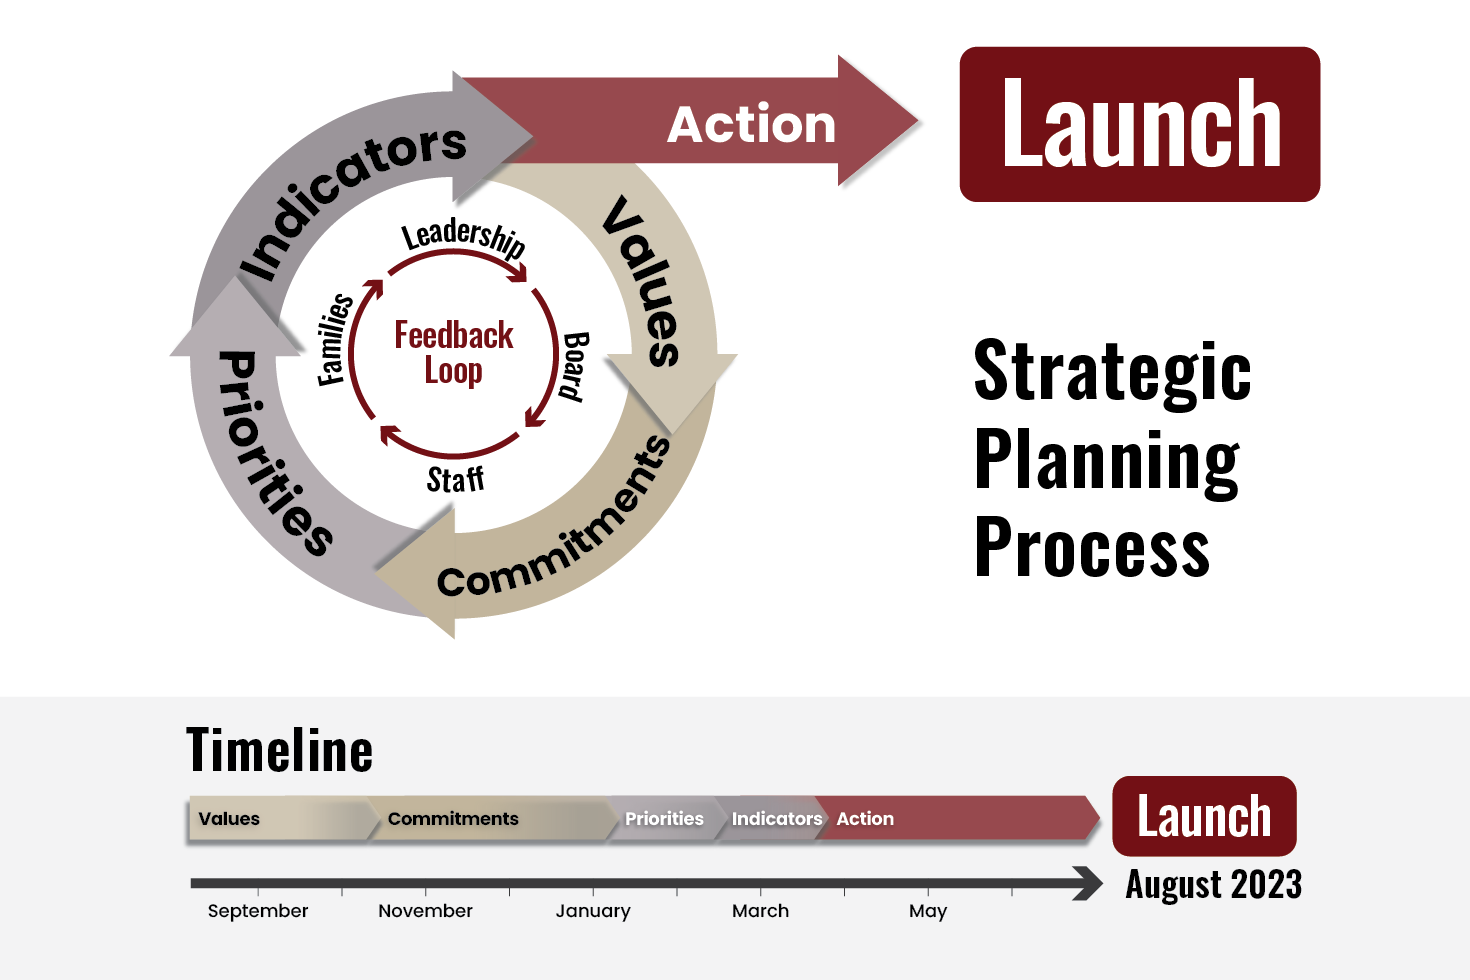 Strategic Planning Process Graphic and Timeline